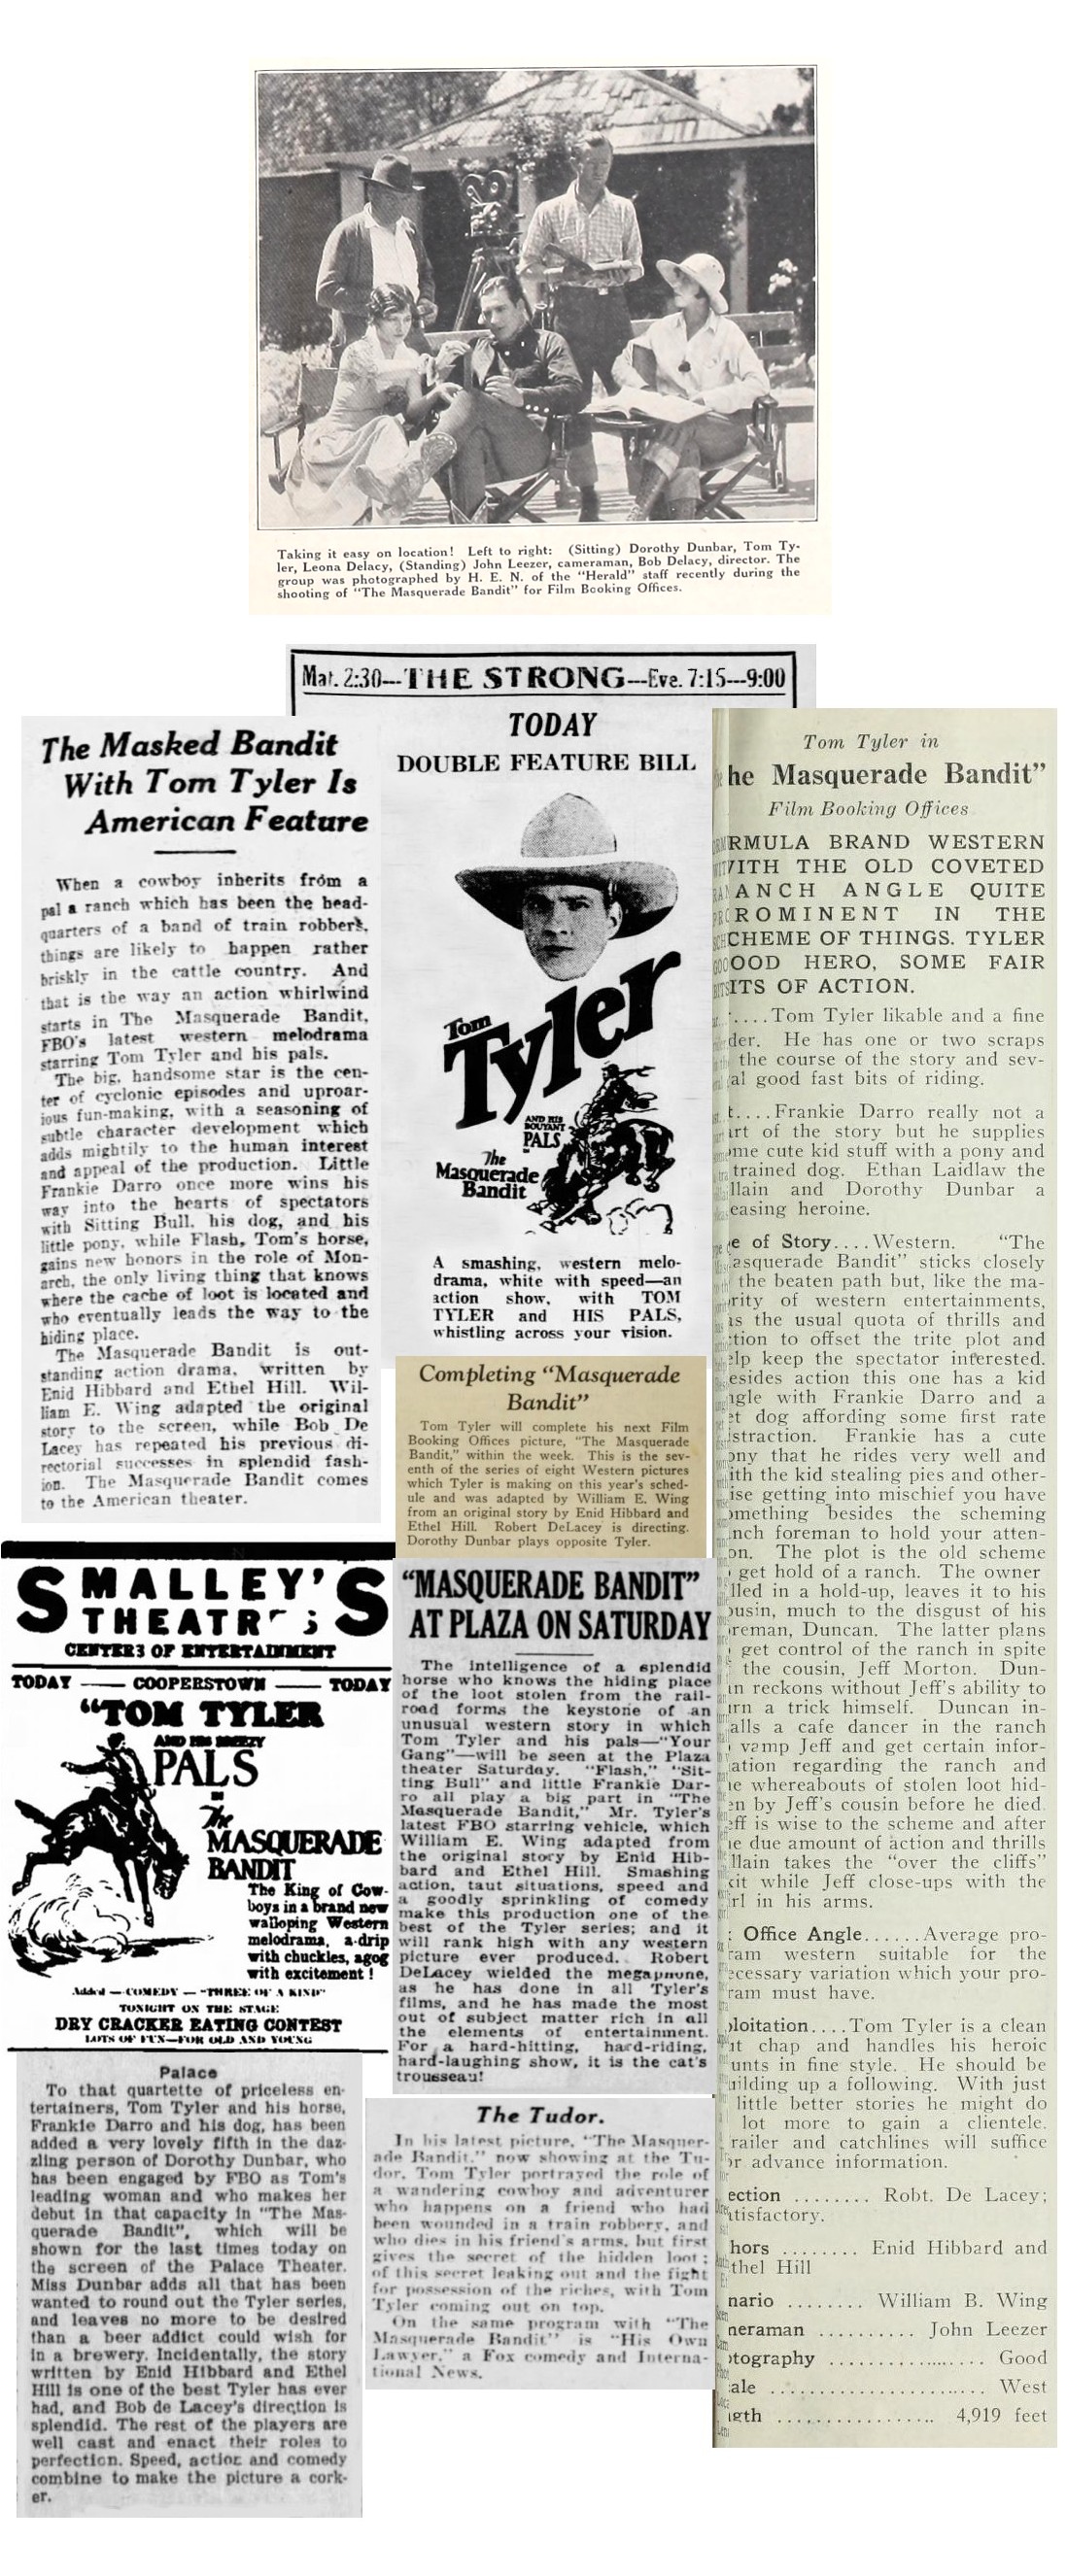 The Masquerade Bandit pictures cinema ads news items reviews